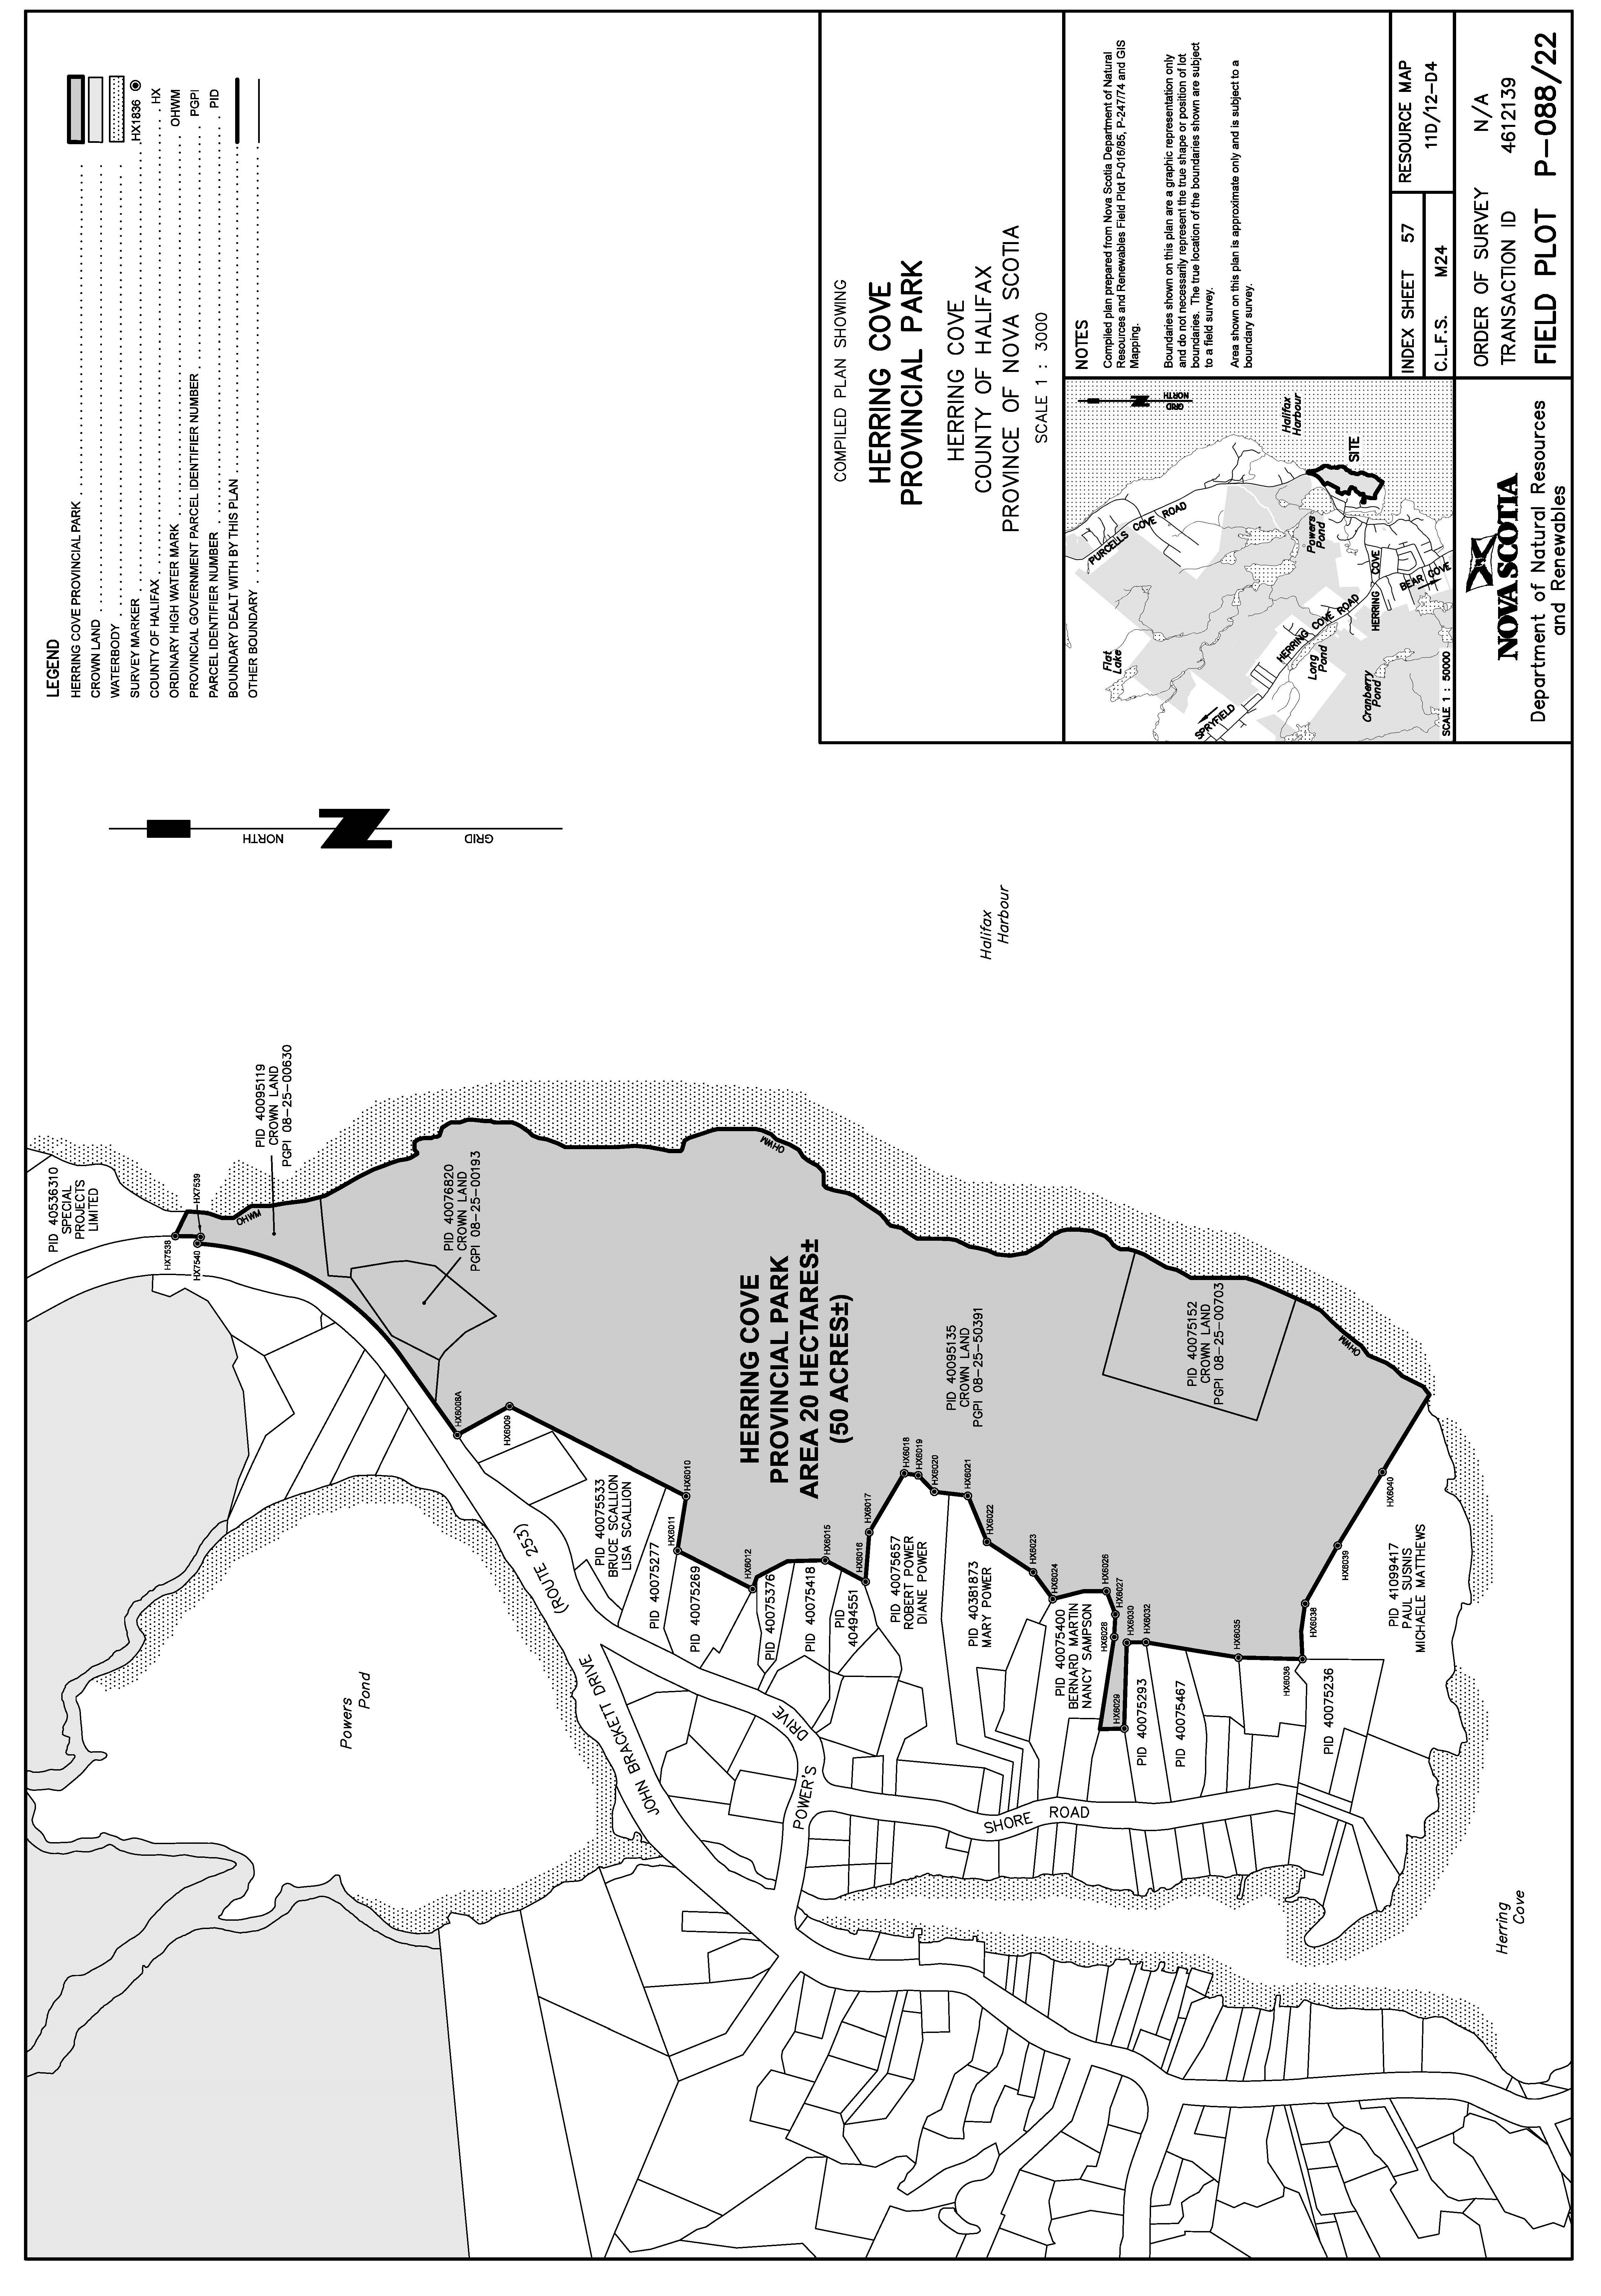 Graphic showing map of Herring Cove Provincial Park